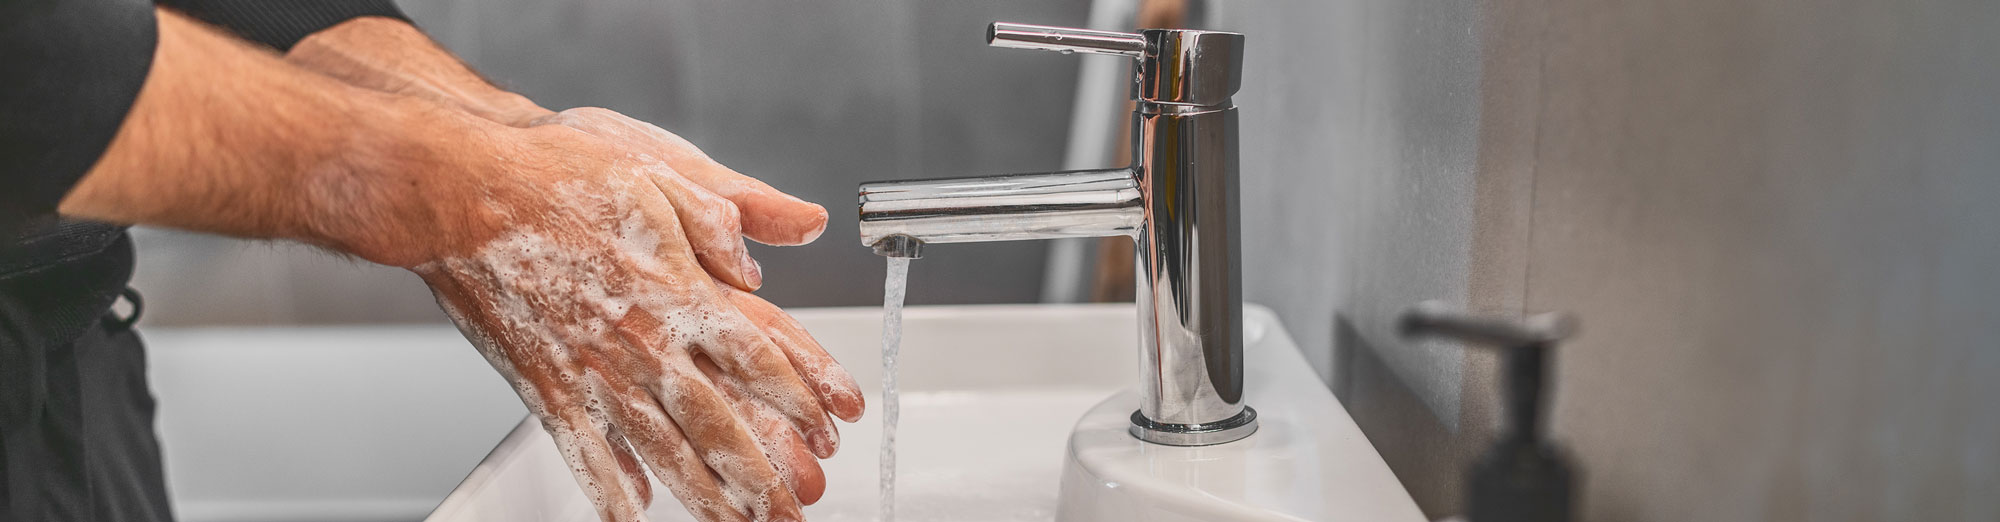 Coronavirus travel prevention wash hands with soap and hot water